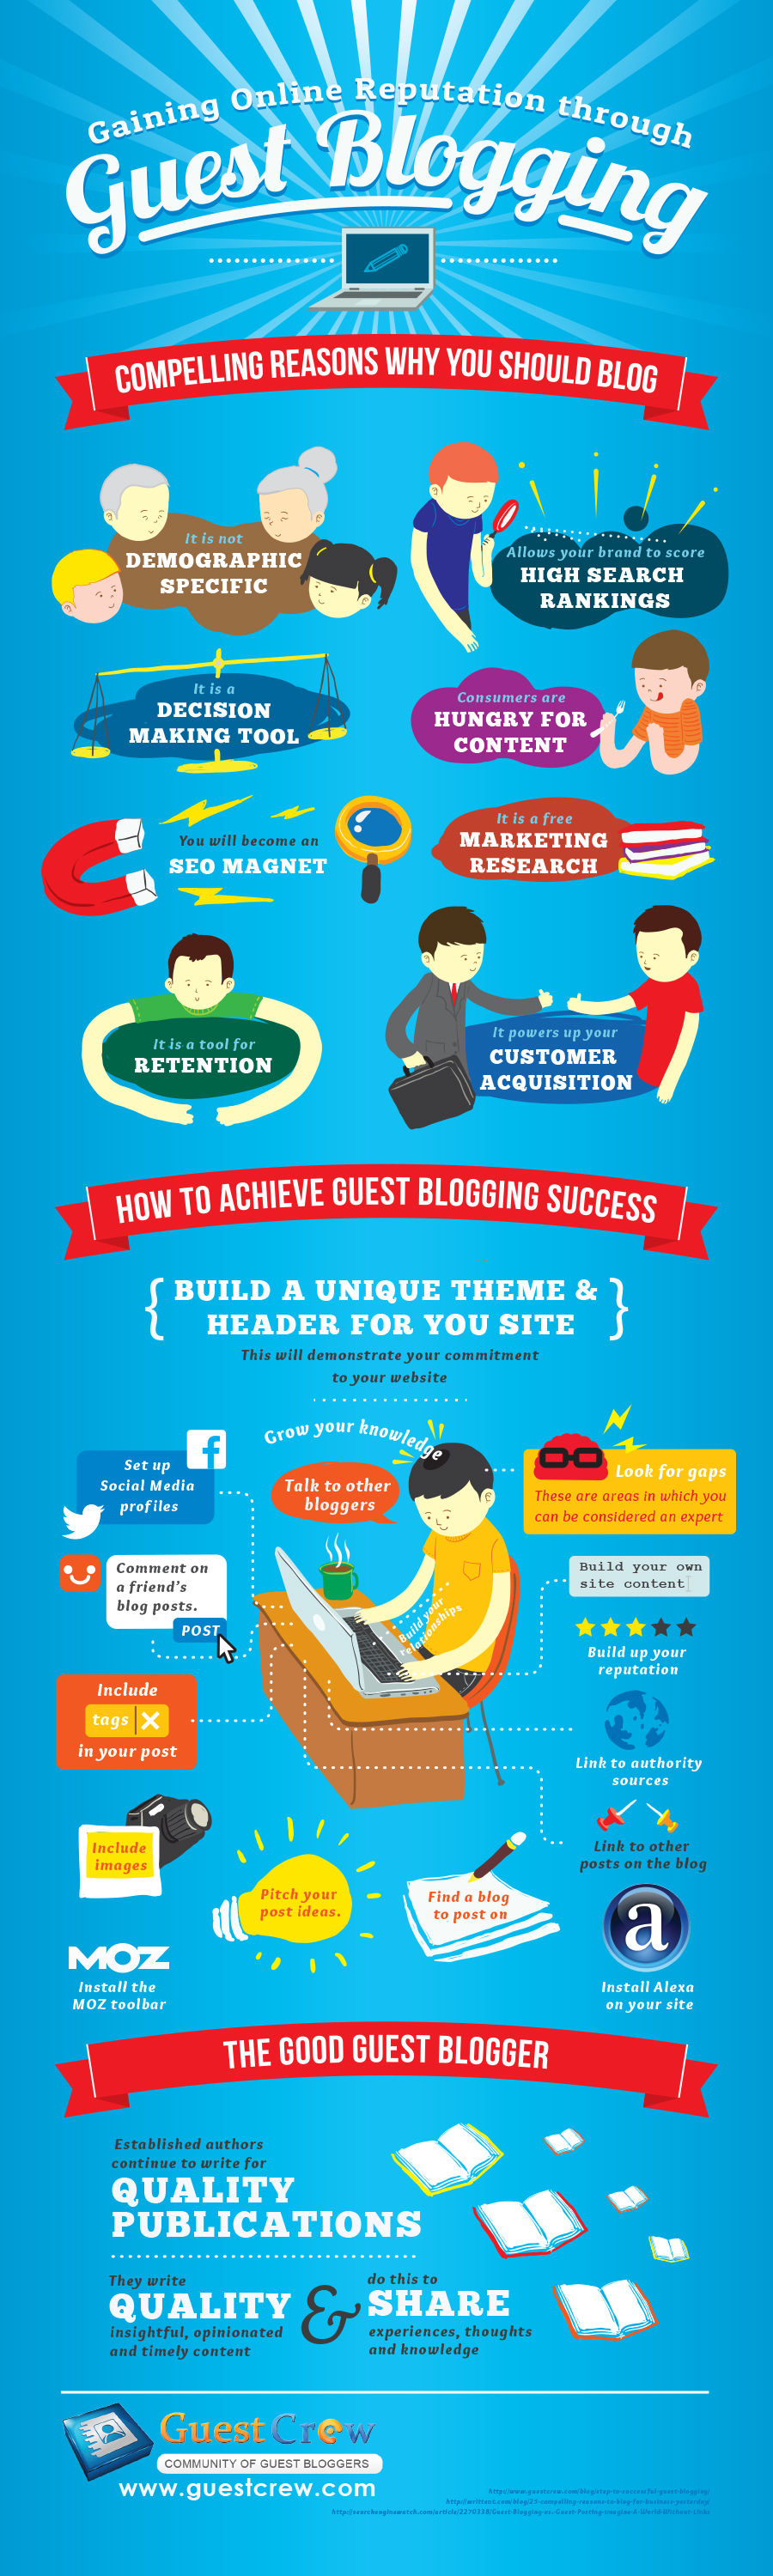 3 Important Guest Blogging Tips For Success